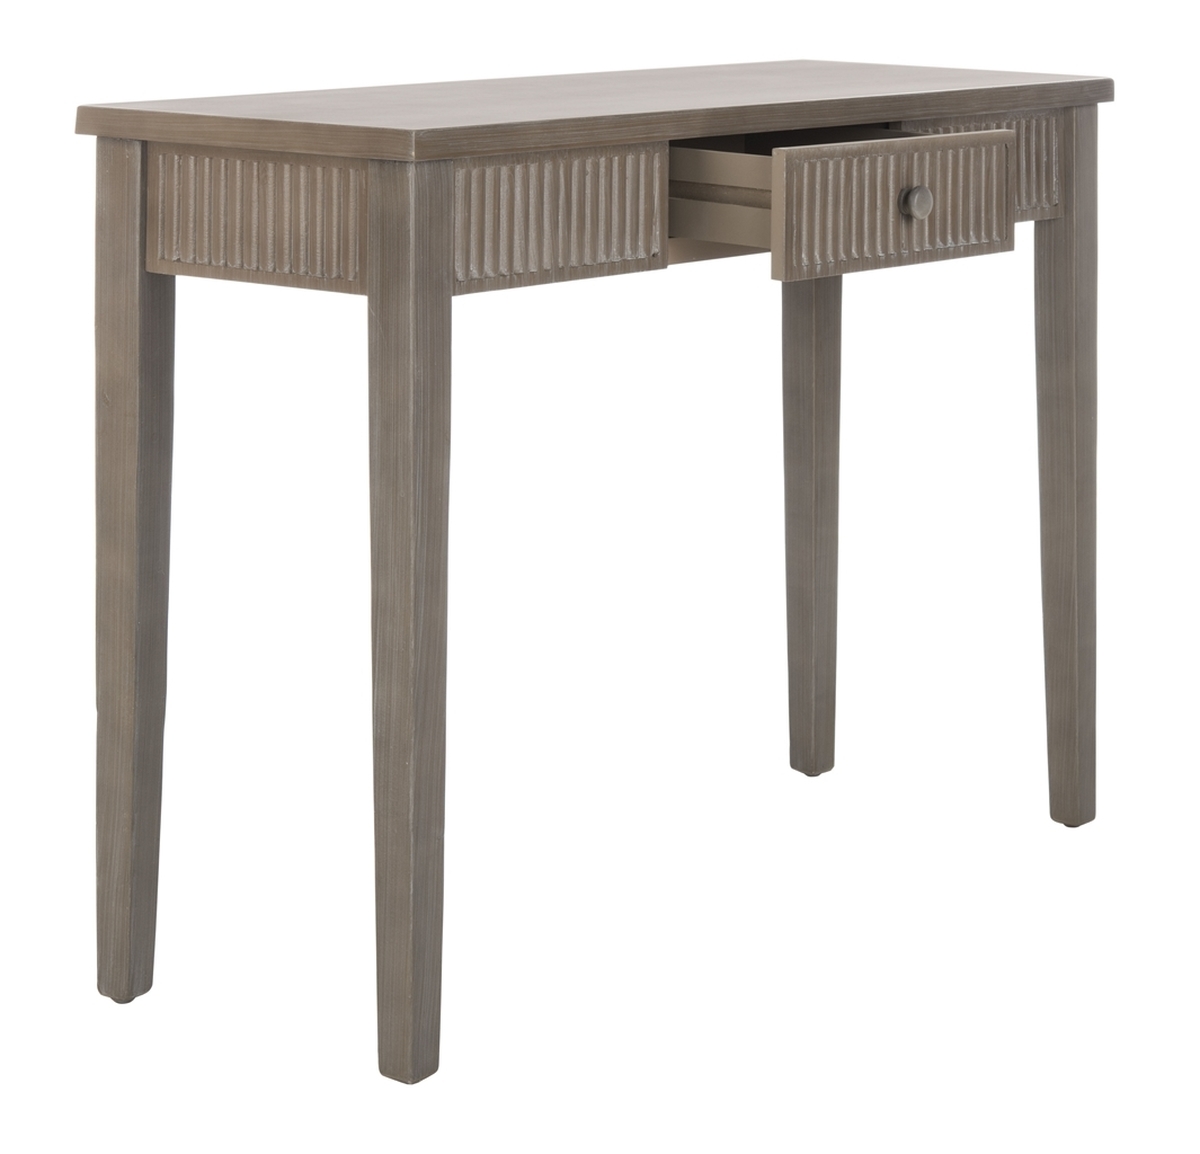 Beale Console With Storage Drawer - Grey - Safavieh - Image 3